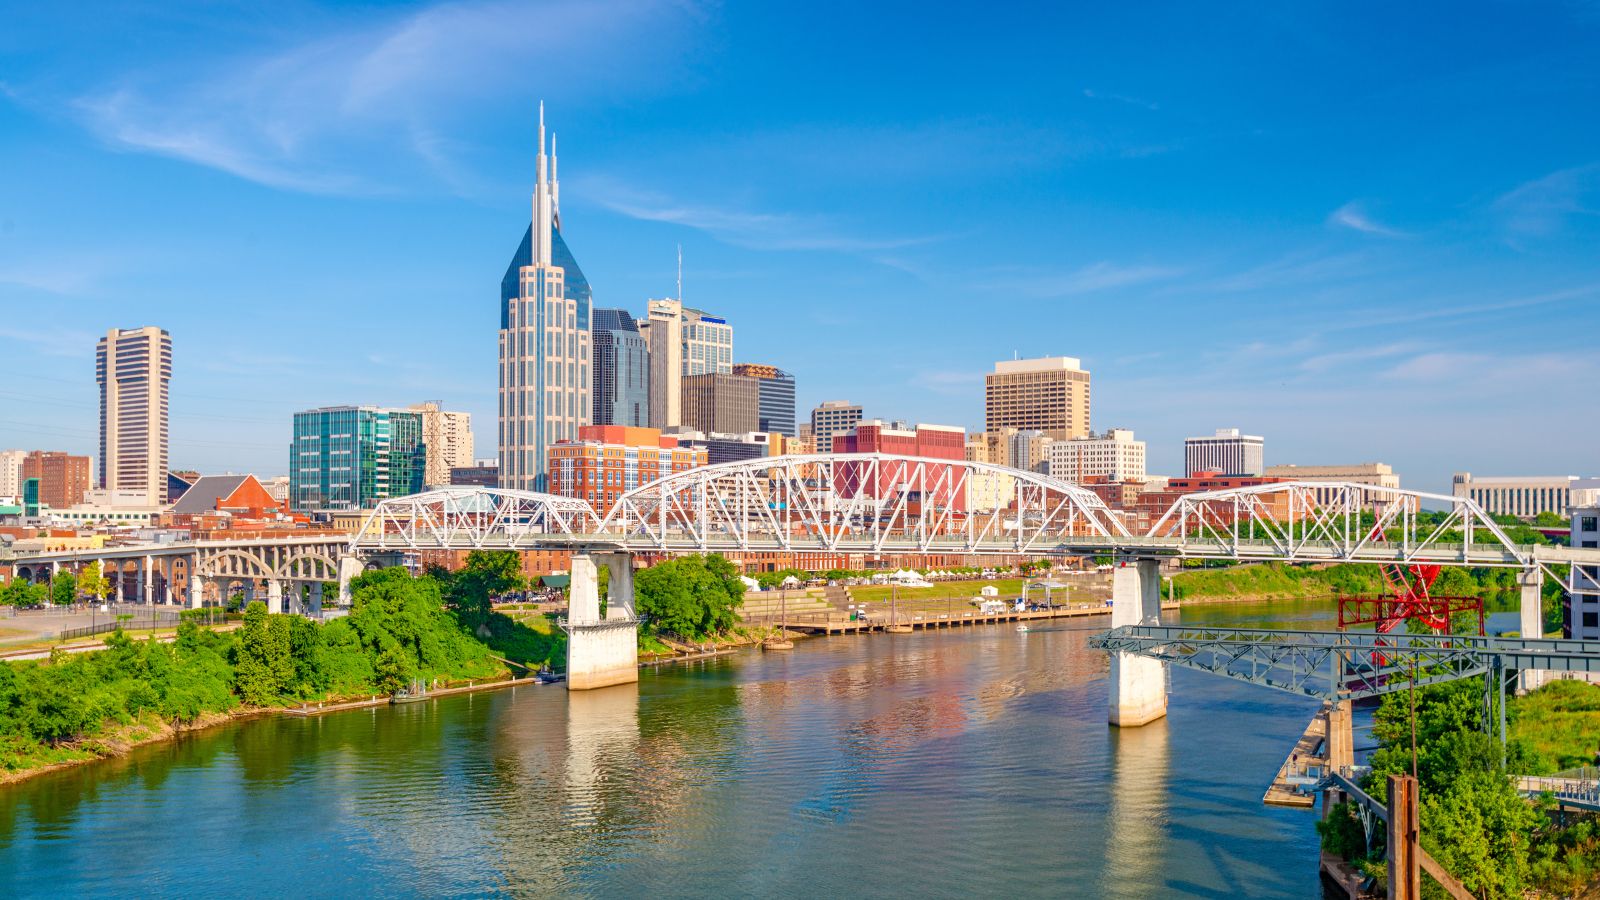 <p><a href="https://www.visitmusiccity.com/explore-nashville/trip-ideas/solo#:~:text=As%20the%20master%20of%20your,Tours%20and%20Nashville%20B%2Dcycle.">Visit Music City</a> writes, “As the master of your own schedule, visit the city’s many museums, art galleries, and attractions at your own pace, or hop on a comprehensive, guided ride through Nashville.” If you’re a lover of country music, then Nashville is the best place to head, thanks to its numerous musical landmarks.</p>